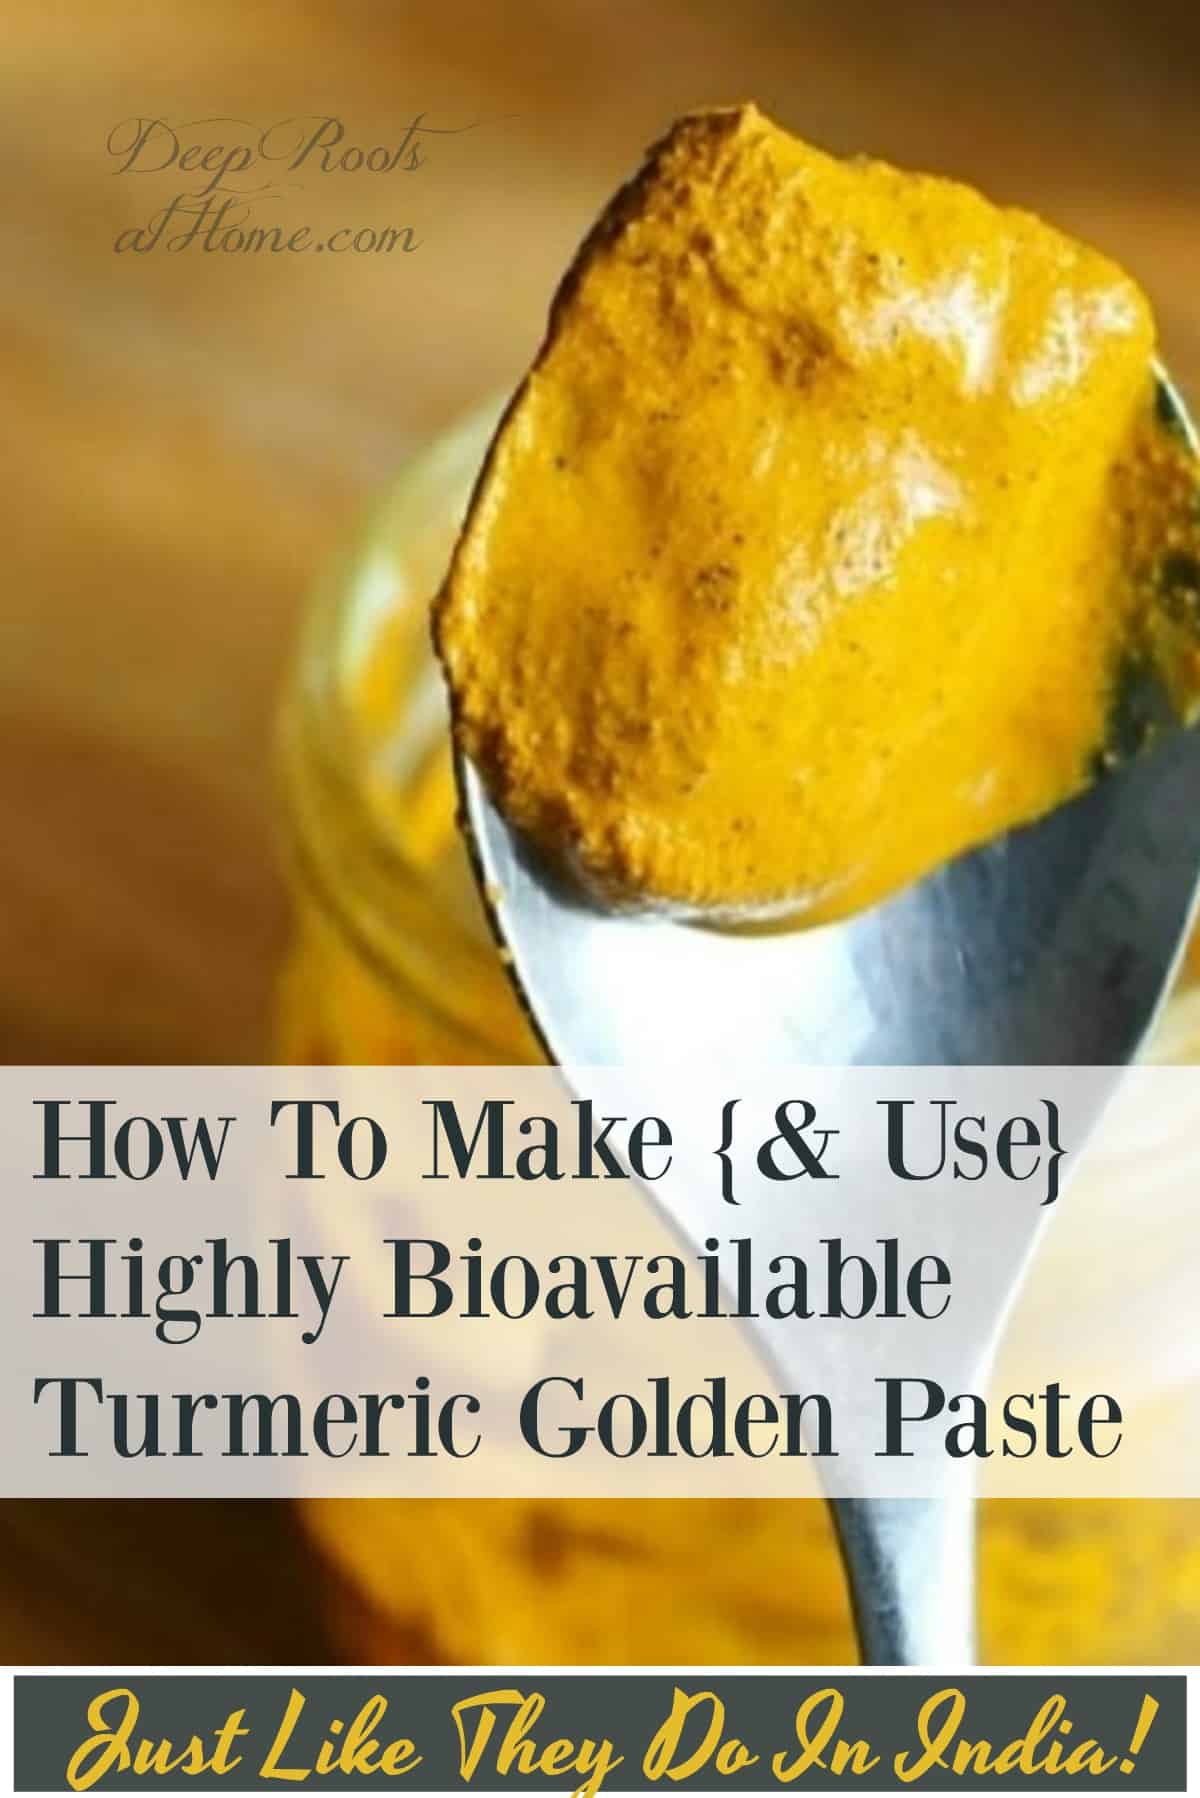 How To Make (& Use) Highly Bioavailable Turmeric Golden Paste